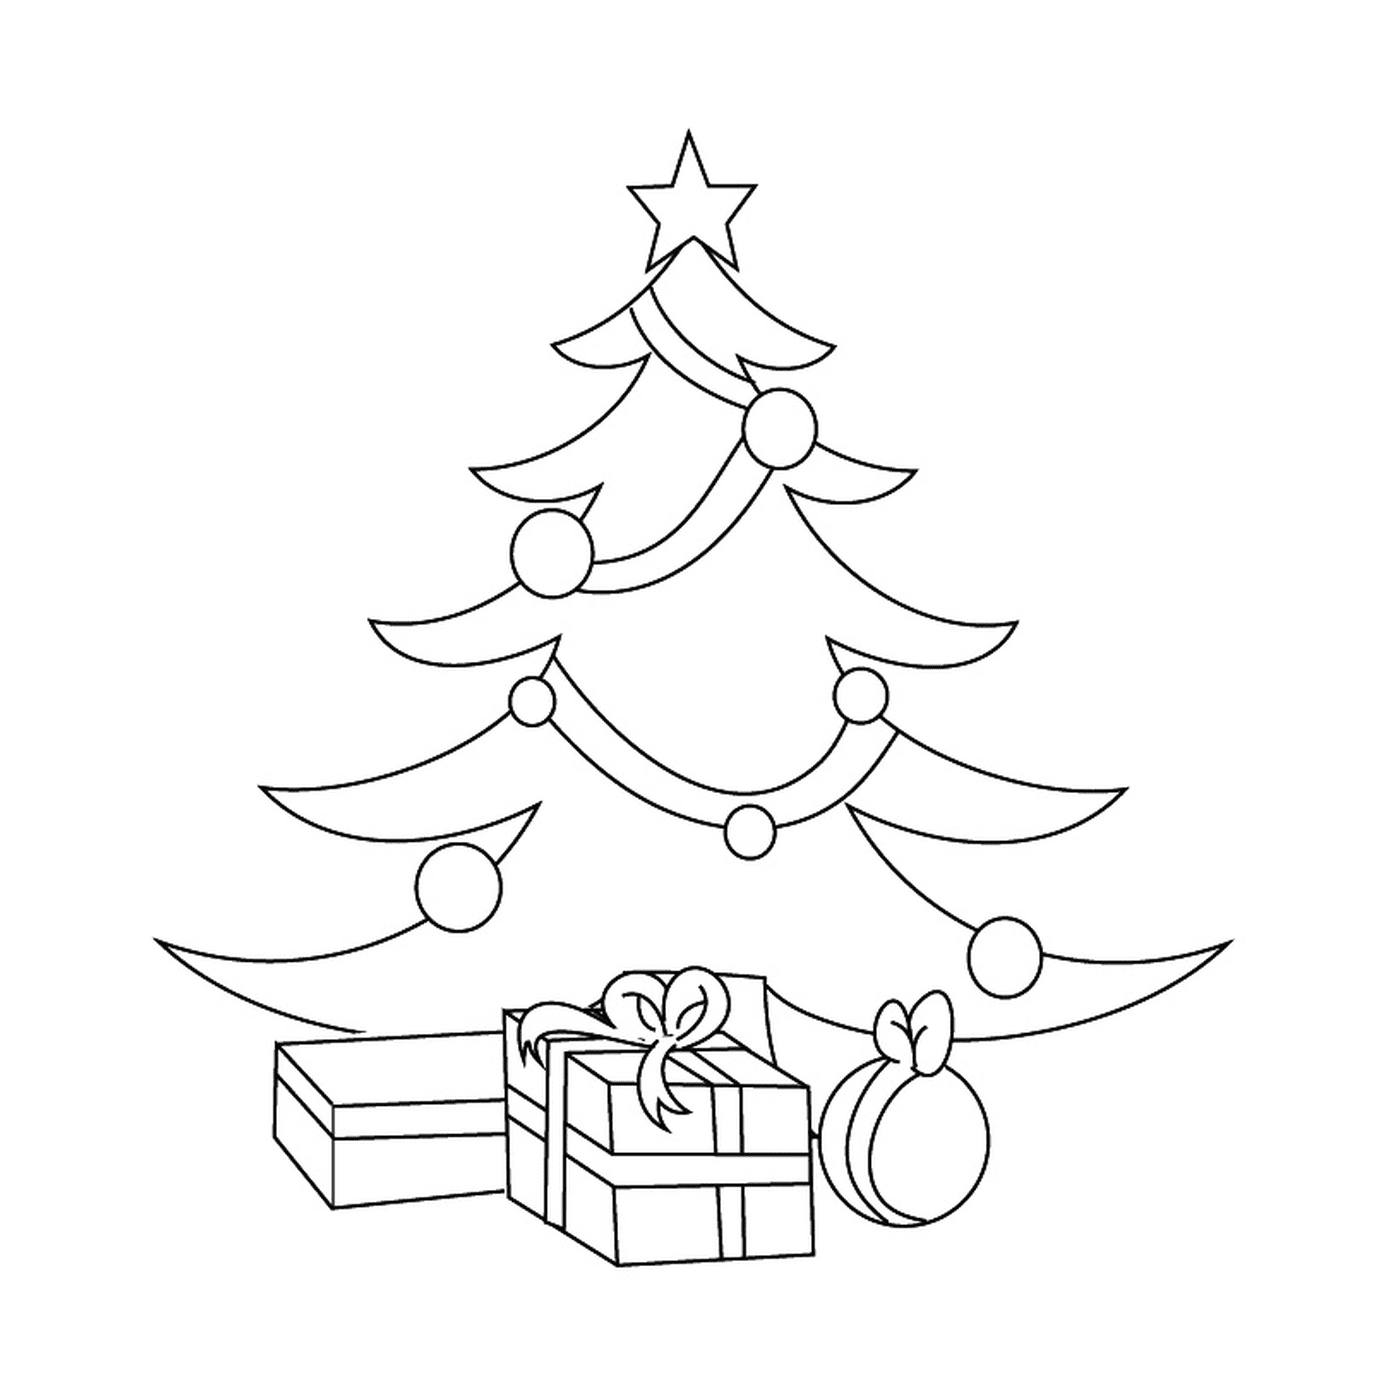  A Christmas tree with gifts 